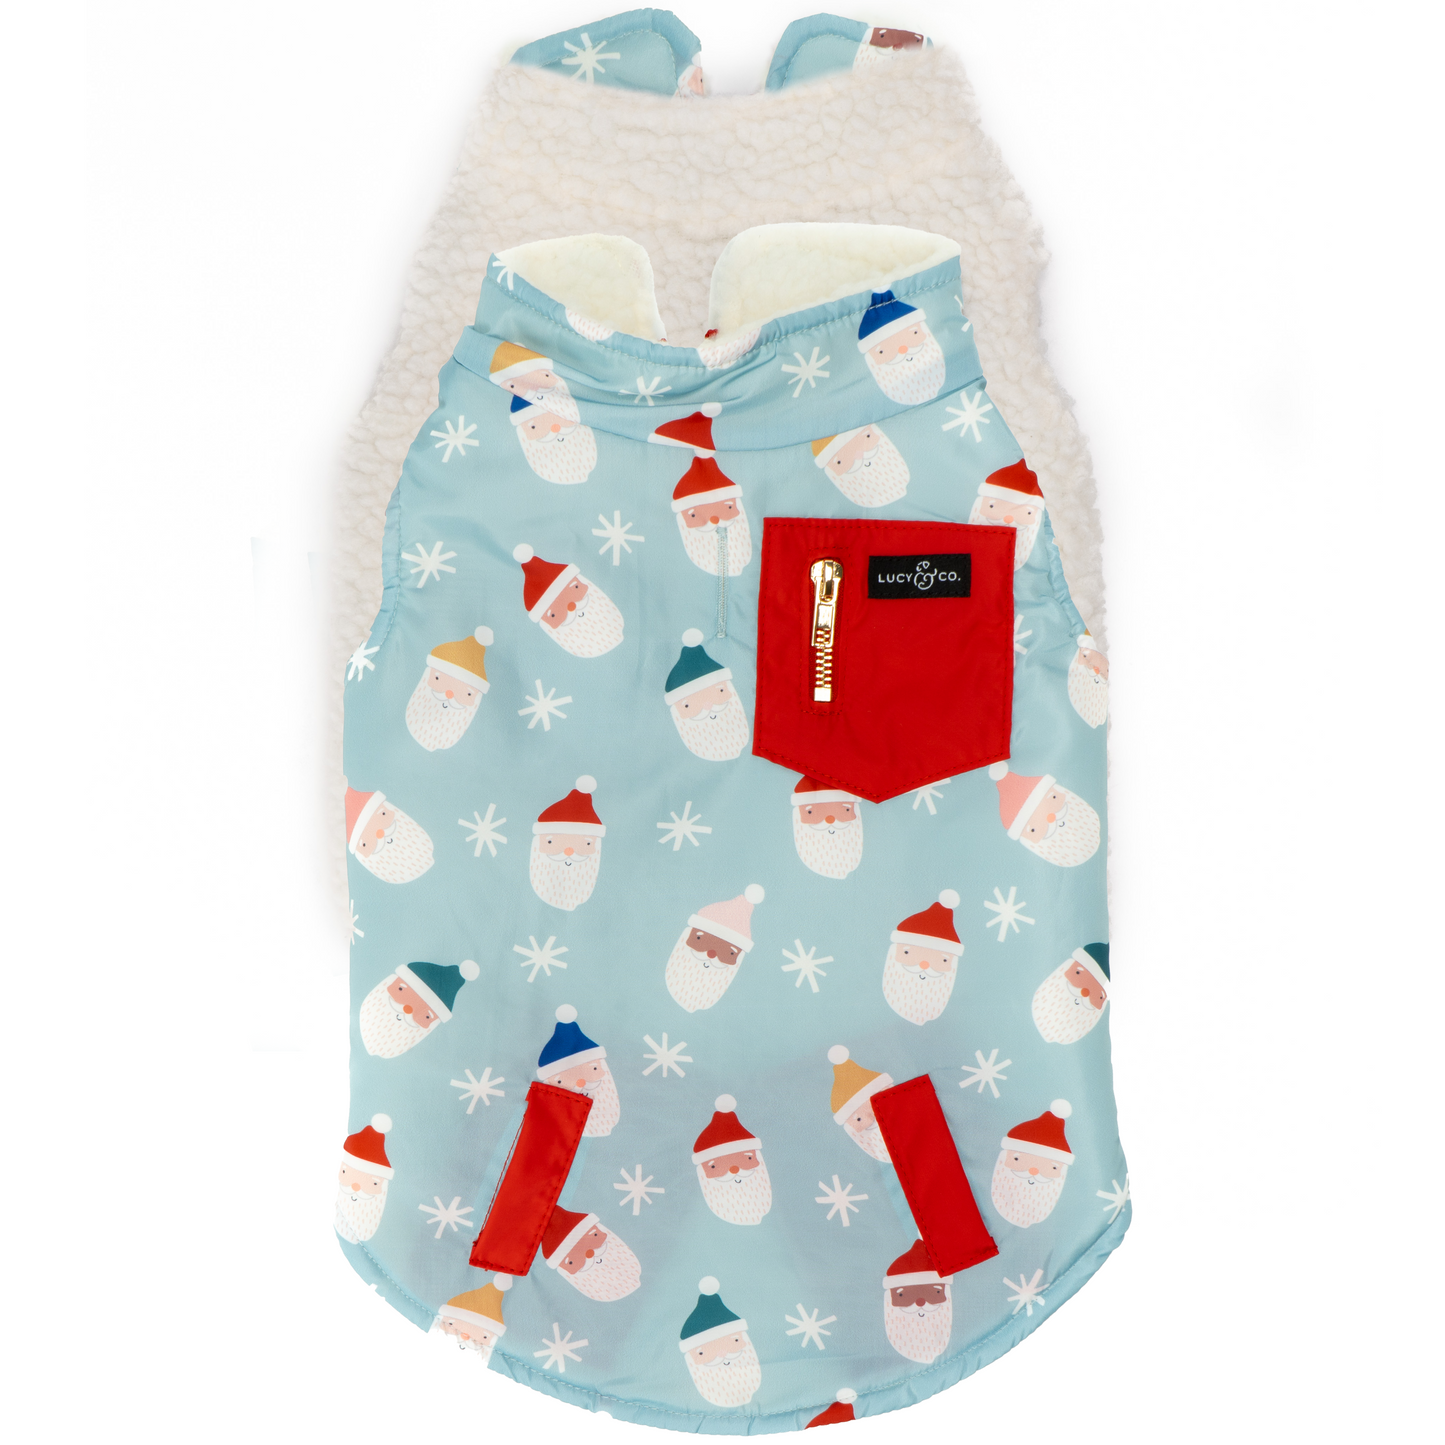 Limited Edition! The Merry & Bright Reversible Teddy Vest